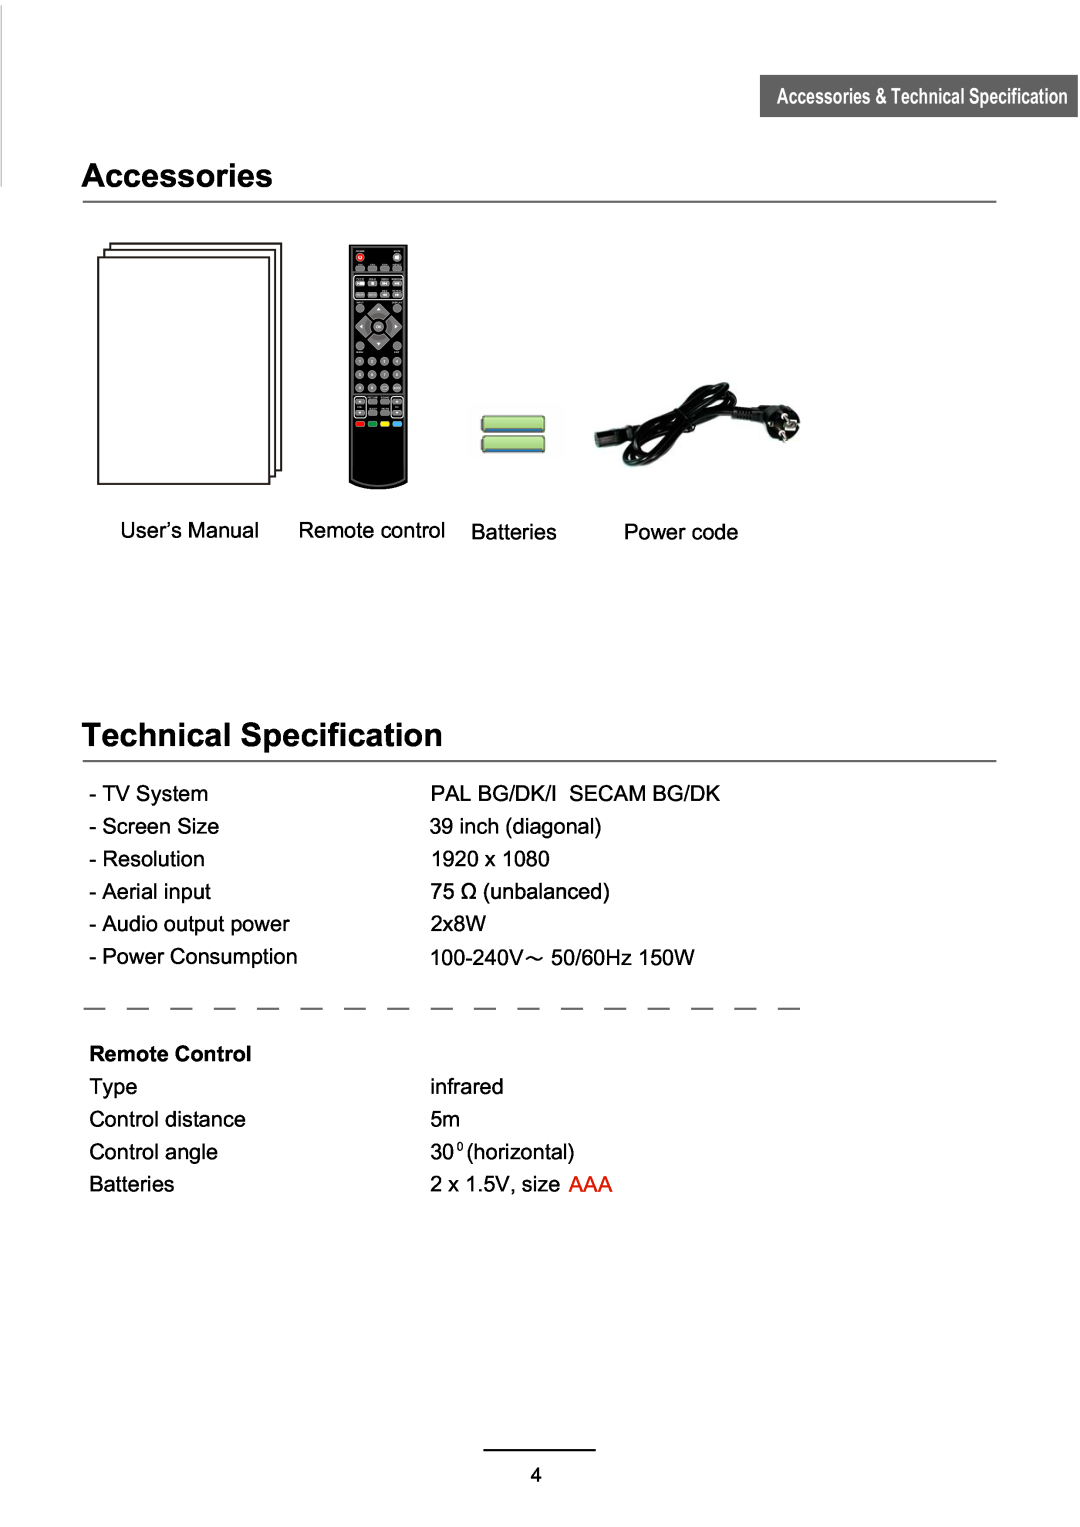 Haier L39Z10A manual Accessories & Technical Specification, Remote Control 